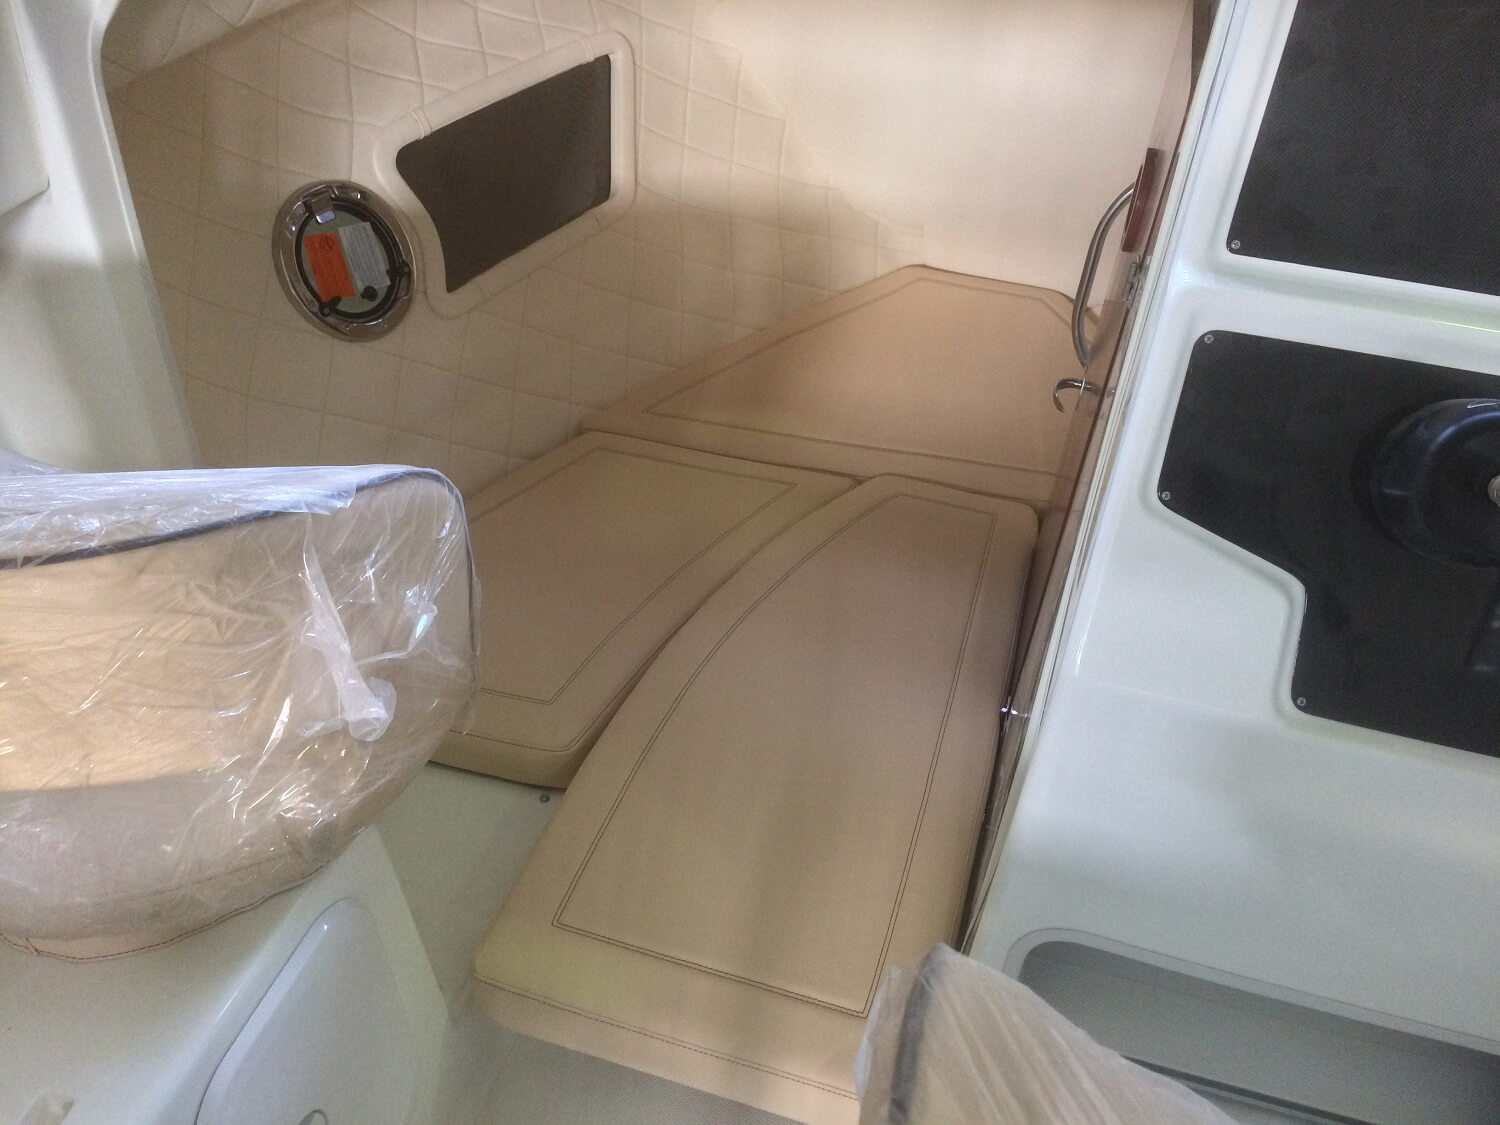 Additional cushion for making a berth